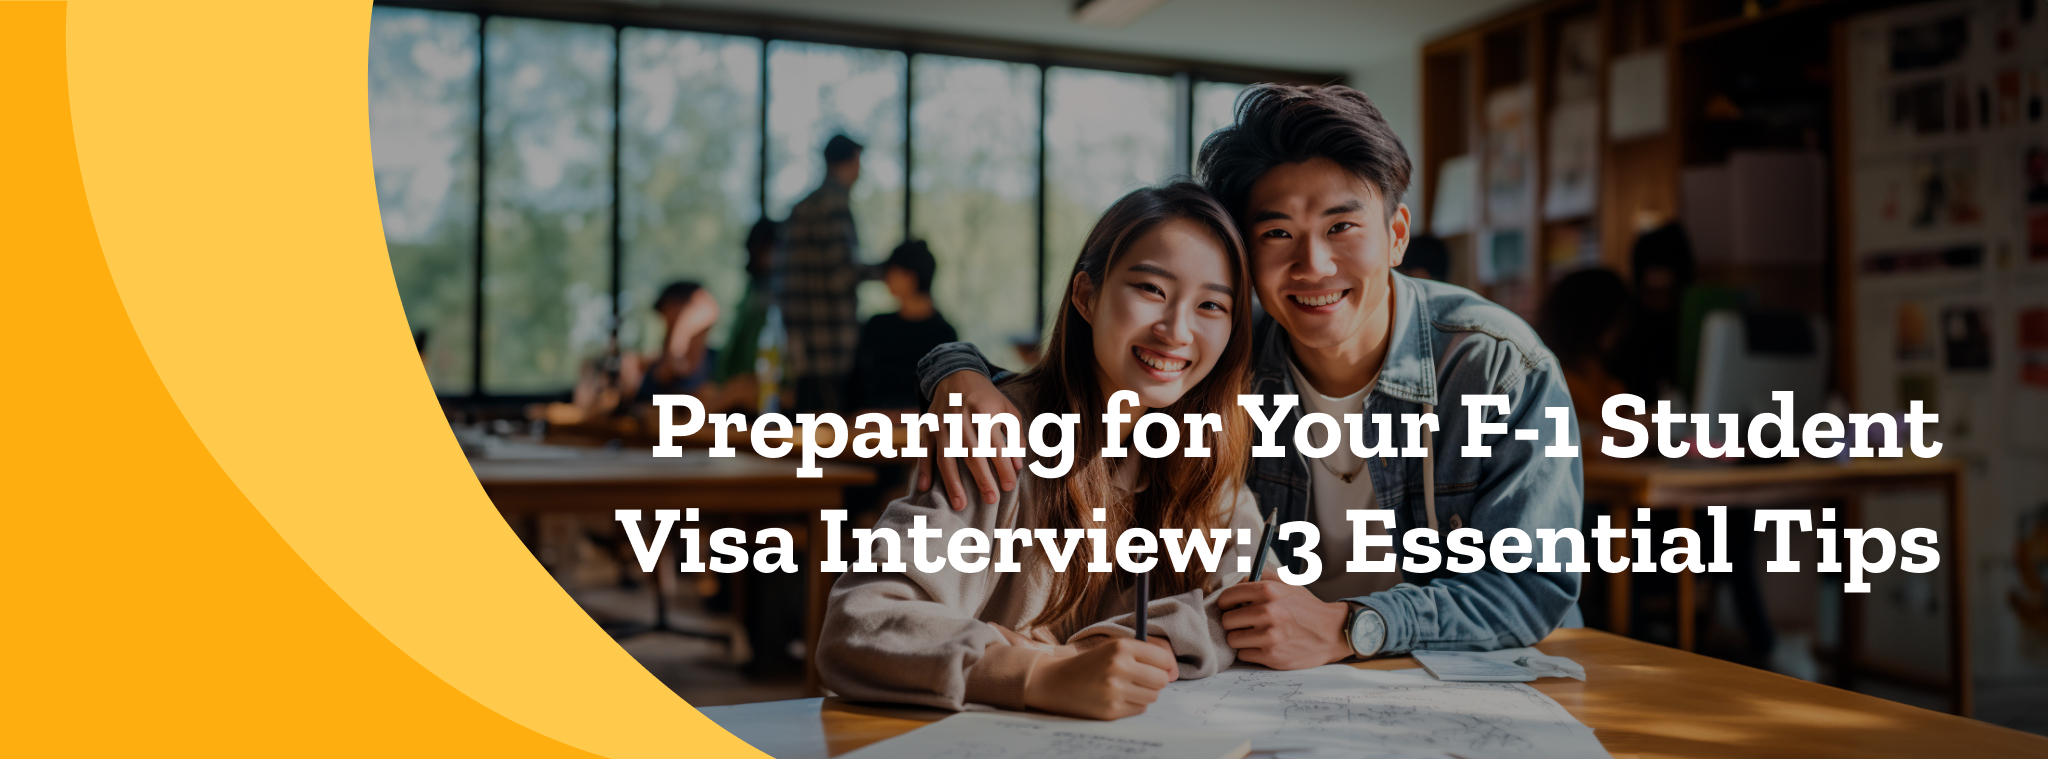 Preparing for Your F-1 Visa Interview: 3 Essential Tips - MPOWER Financing